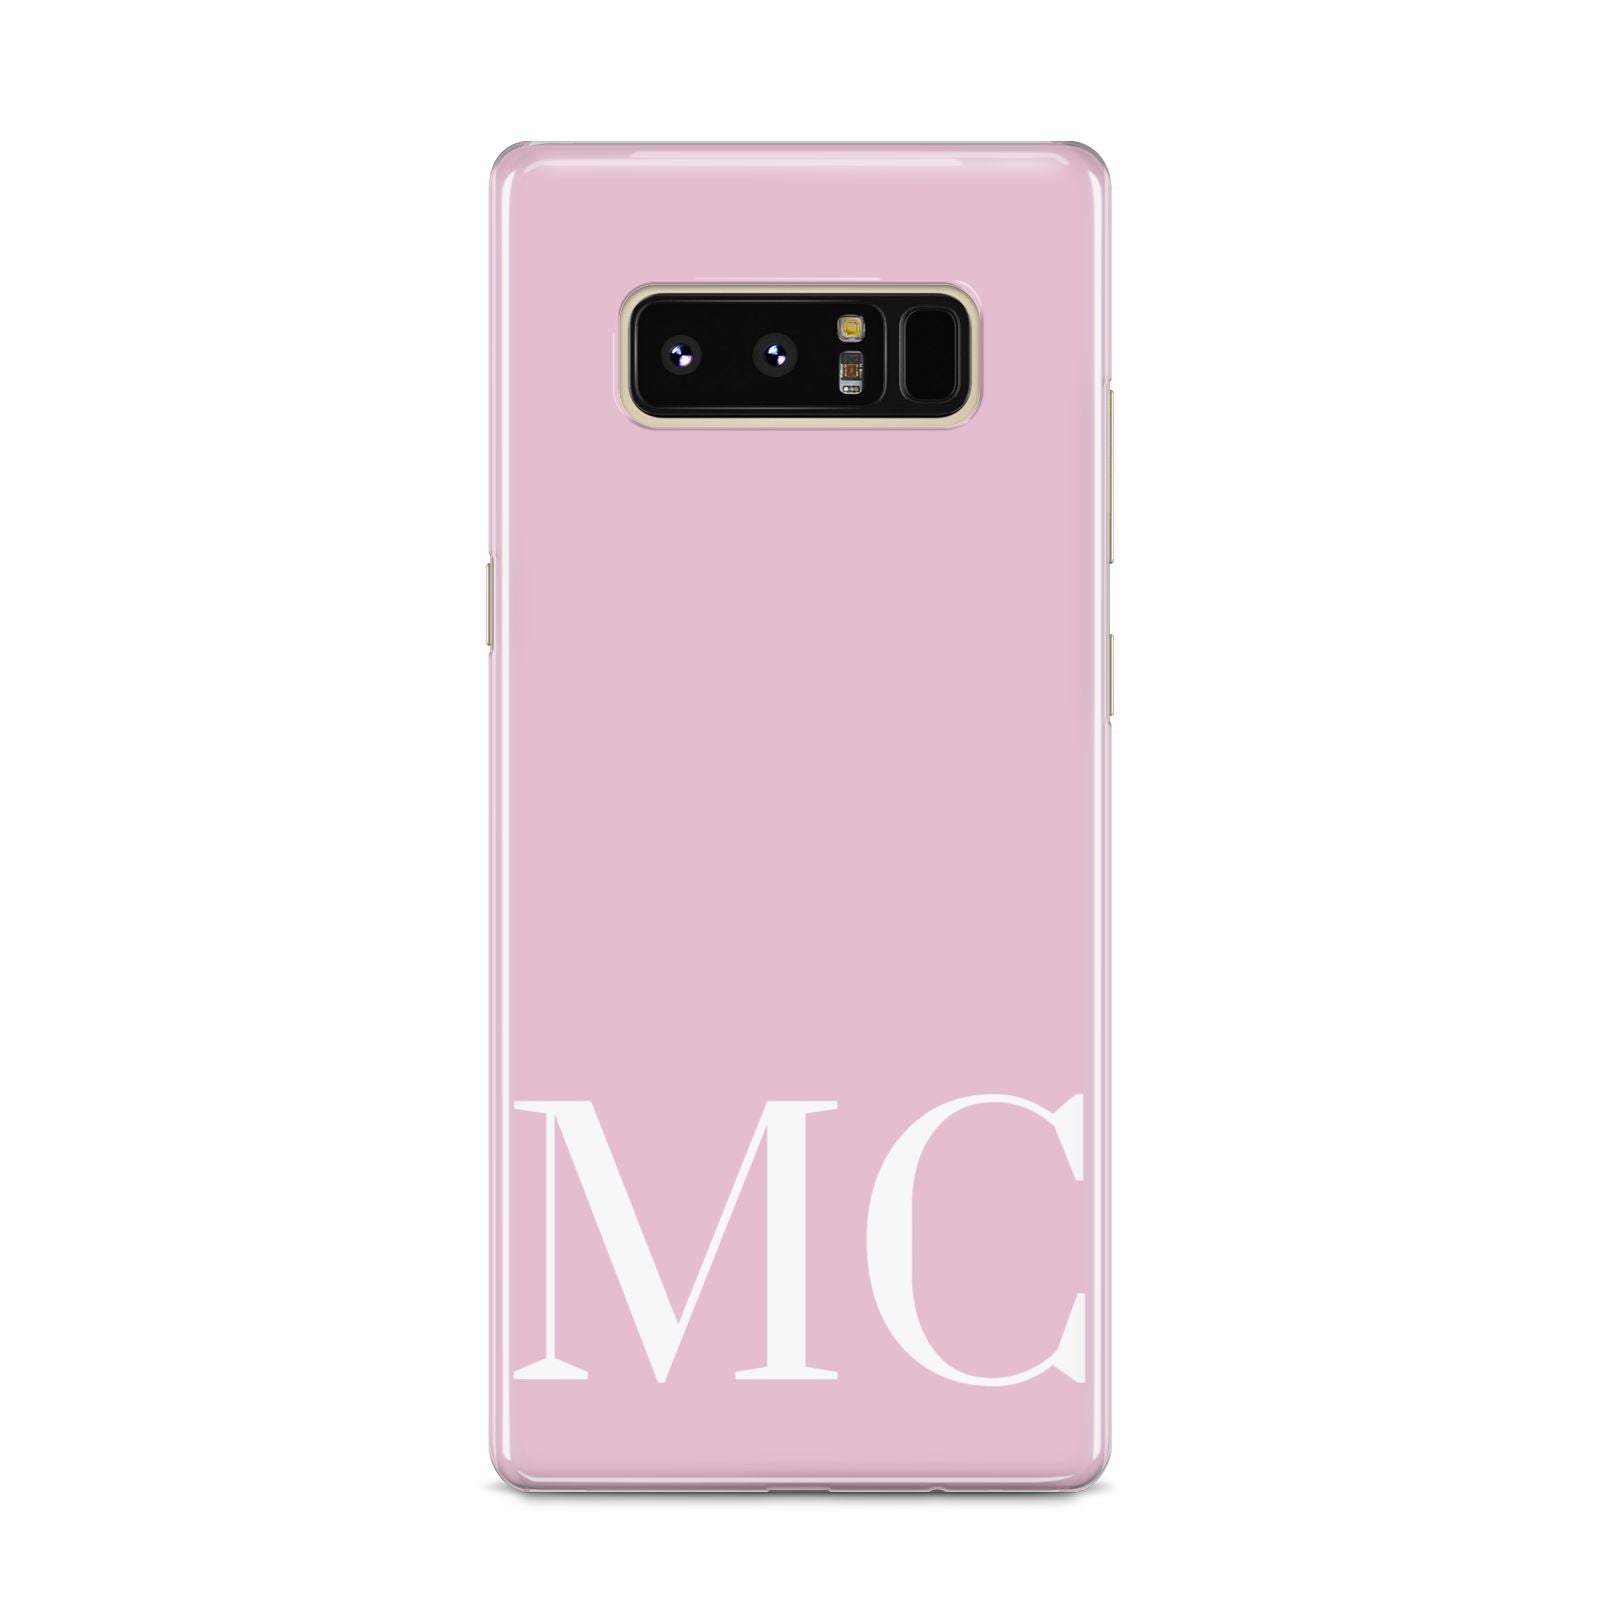 Initials Personalised 2 Samsung Galaxy S8 Case